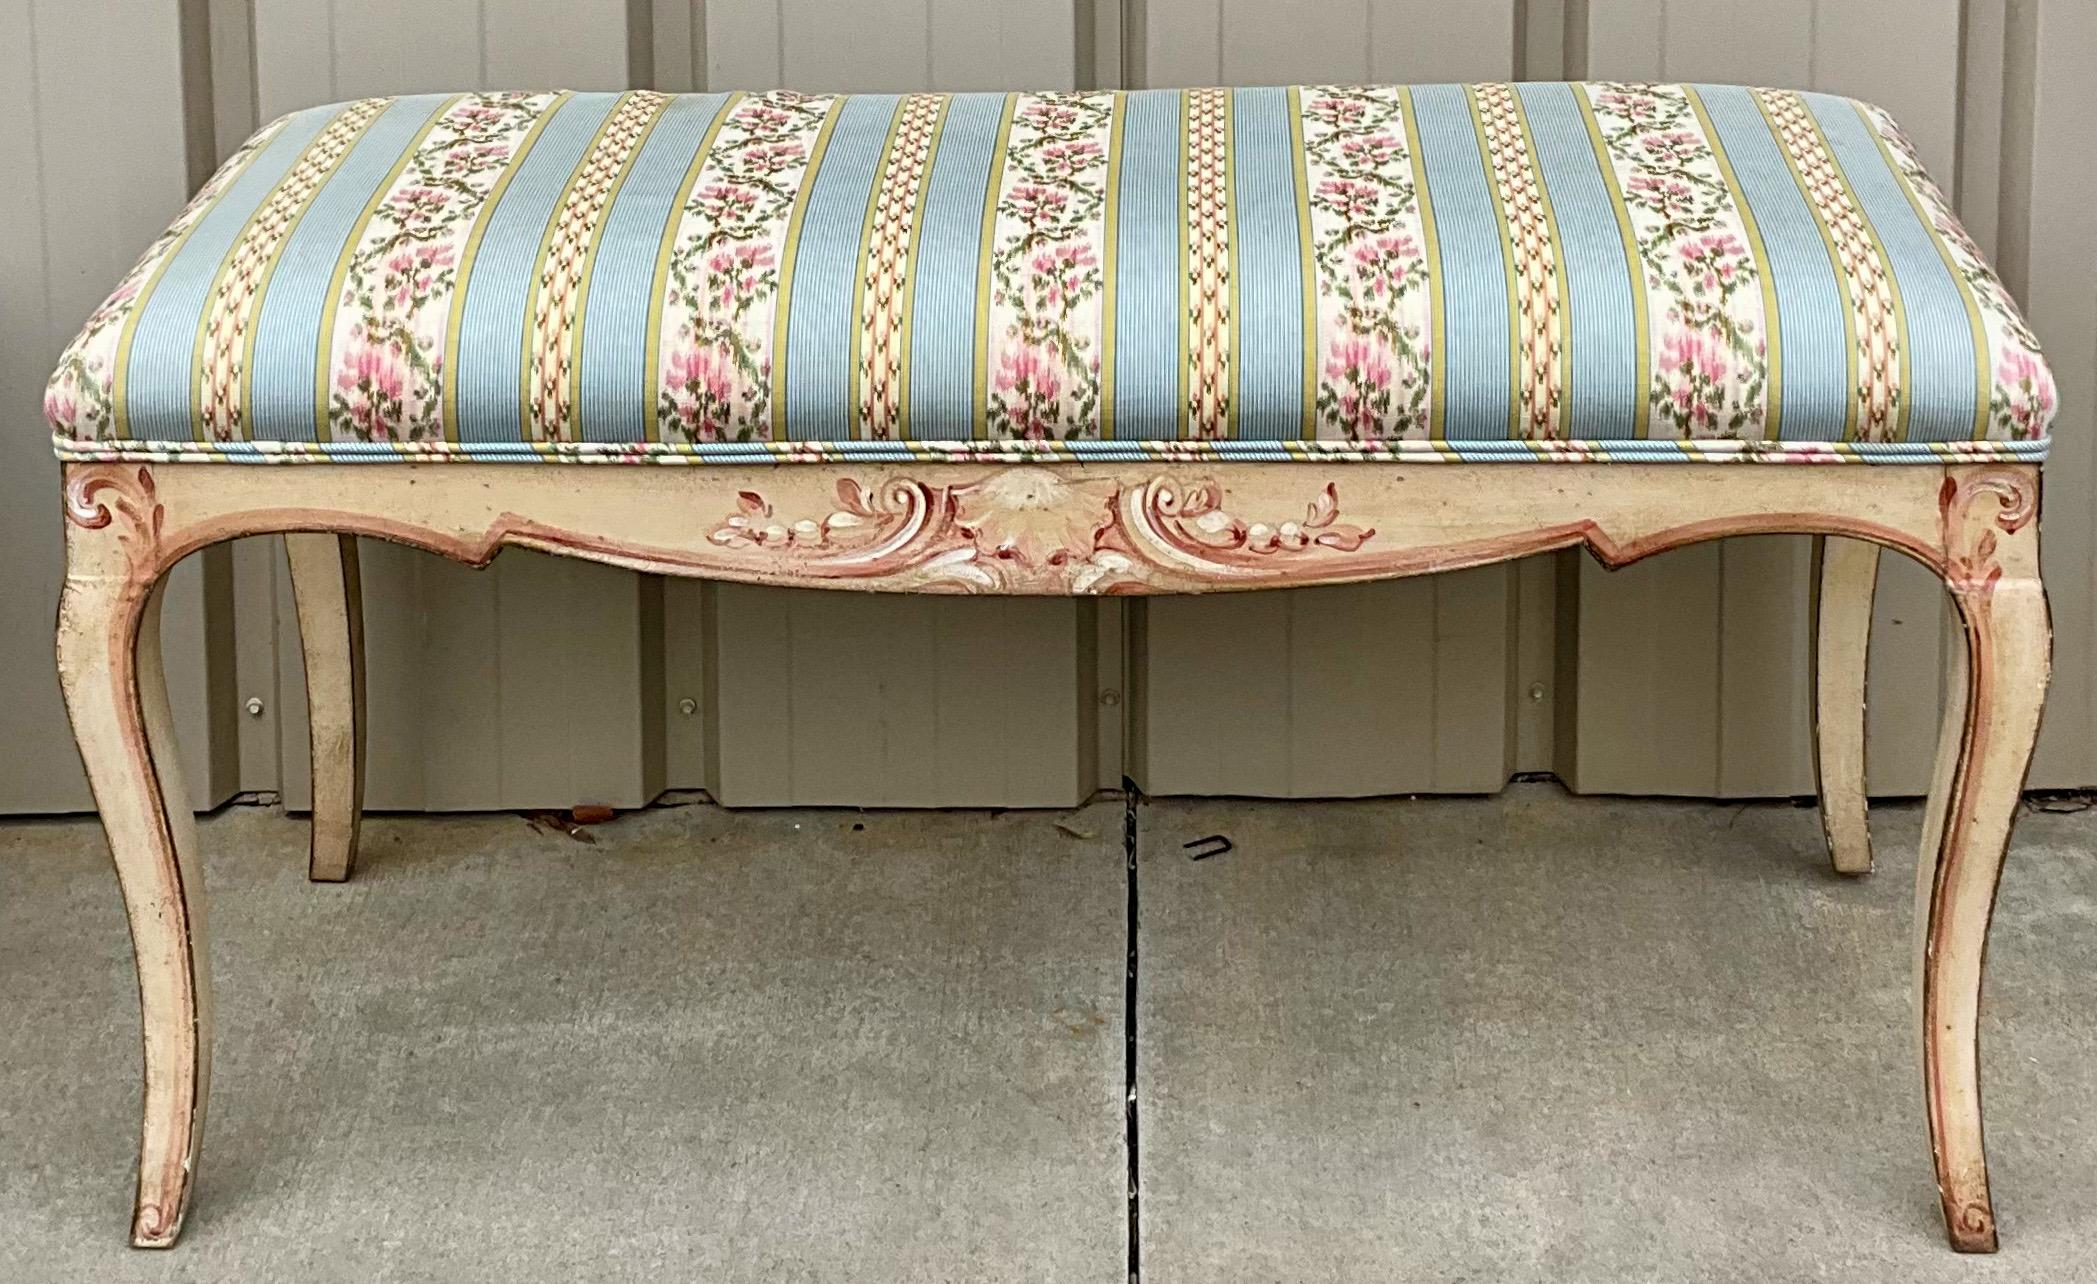 1960s Carved And Painted Italian Bench / Ottoman In Striped Floral Chintz  For Sale 1